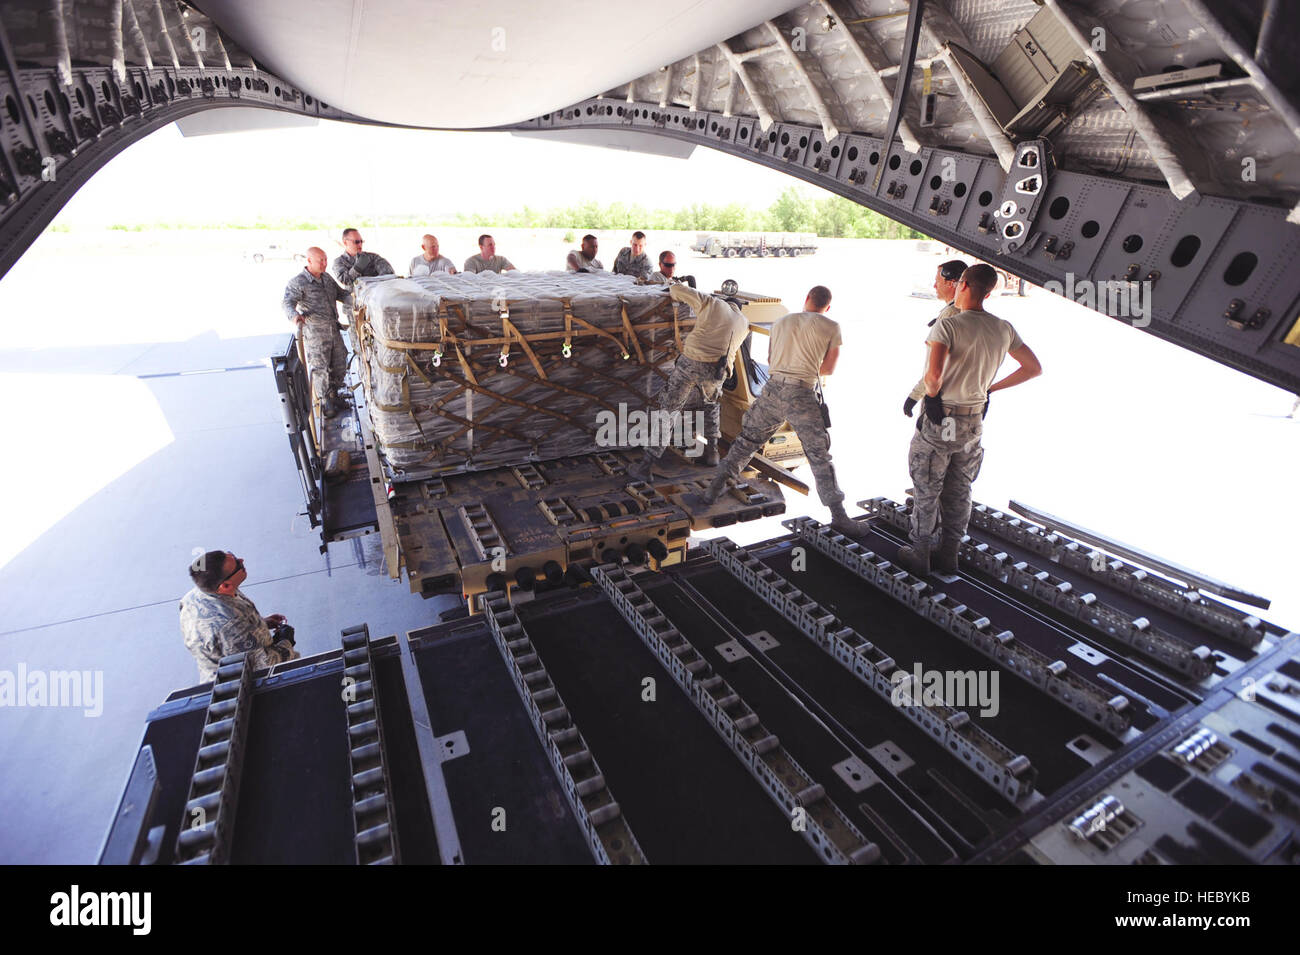 As part of the cargo shipments from Transit Center at Manas, Airmen stack empty surplus pallets on a C-17 Globemaster III, May 20, 2014.  Technical Sgt. Edgardo Franco, air transportation craftsman, Senior Master Sgt. Shawn Walker, superintendent of knowledge operations,  Col. John Vaughn, 376th Air Expeditionary Wing vice commnader, Chief Master Sgt. Gregory Warren, 376th AEW command chief, Senior Airman Kody Novak, air transportation journeyman, Staff Sgt. Jon Luna, air transportation craftsman, Staff Sgt. Lucas Hofstra, air transportation craftsman, Senior Master Sgt. Mark Foreman, Air Term Stock Photo